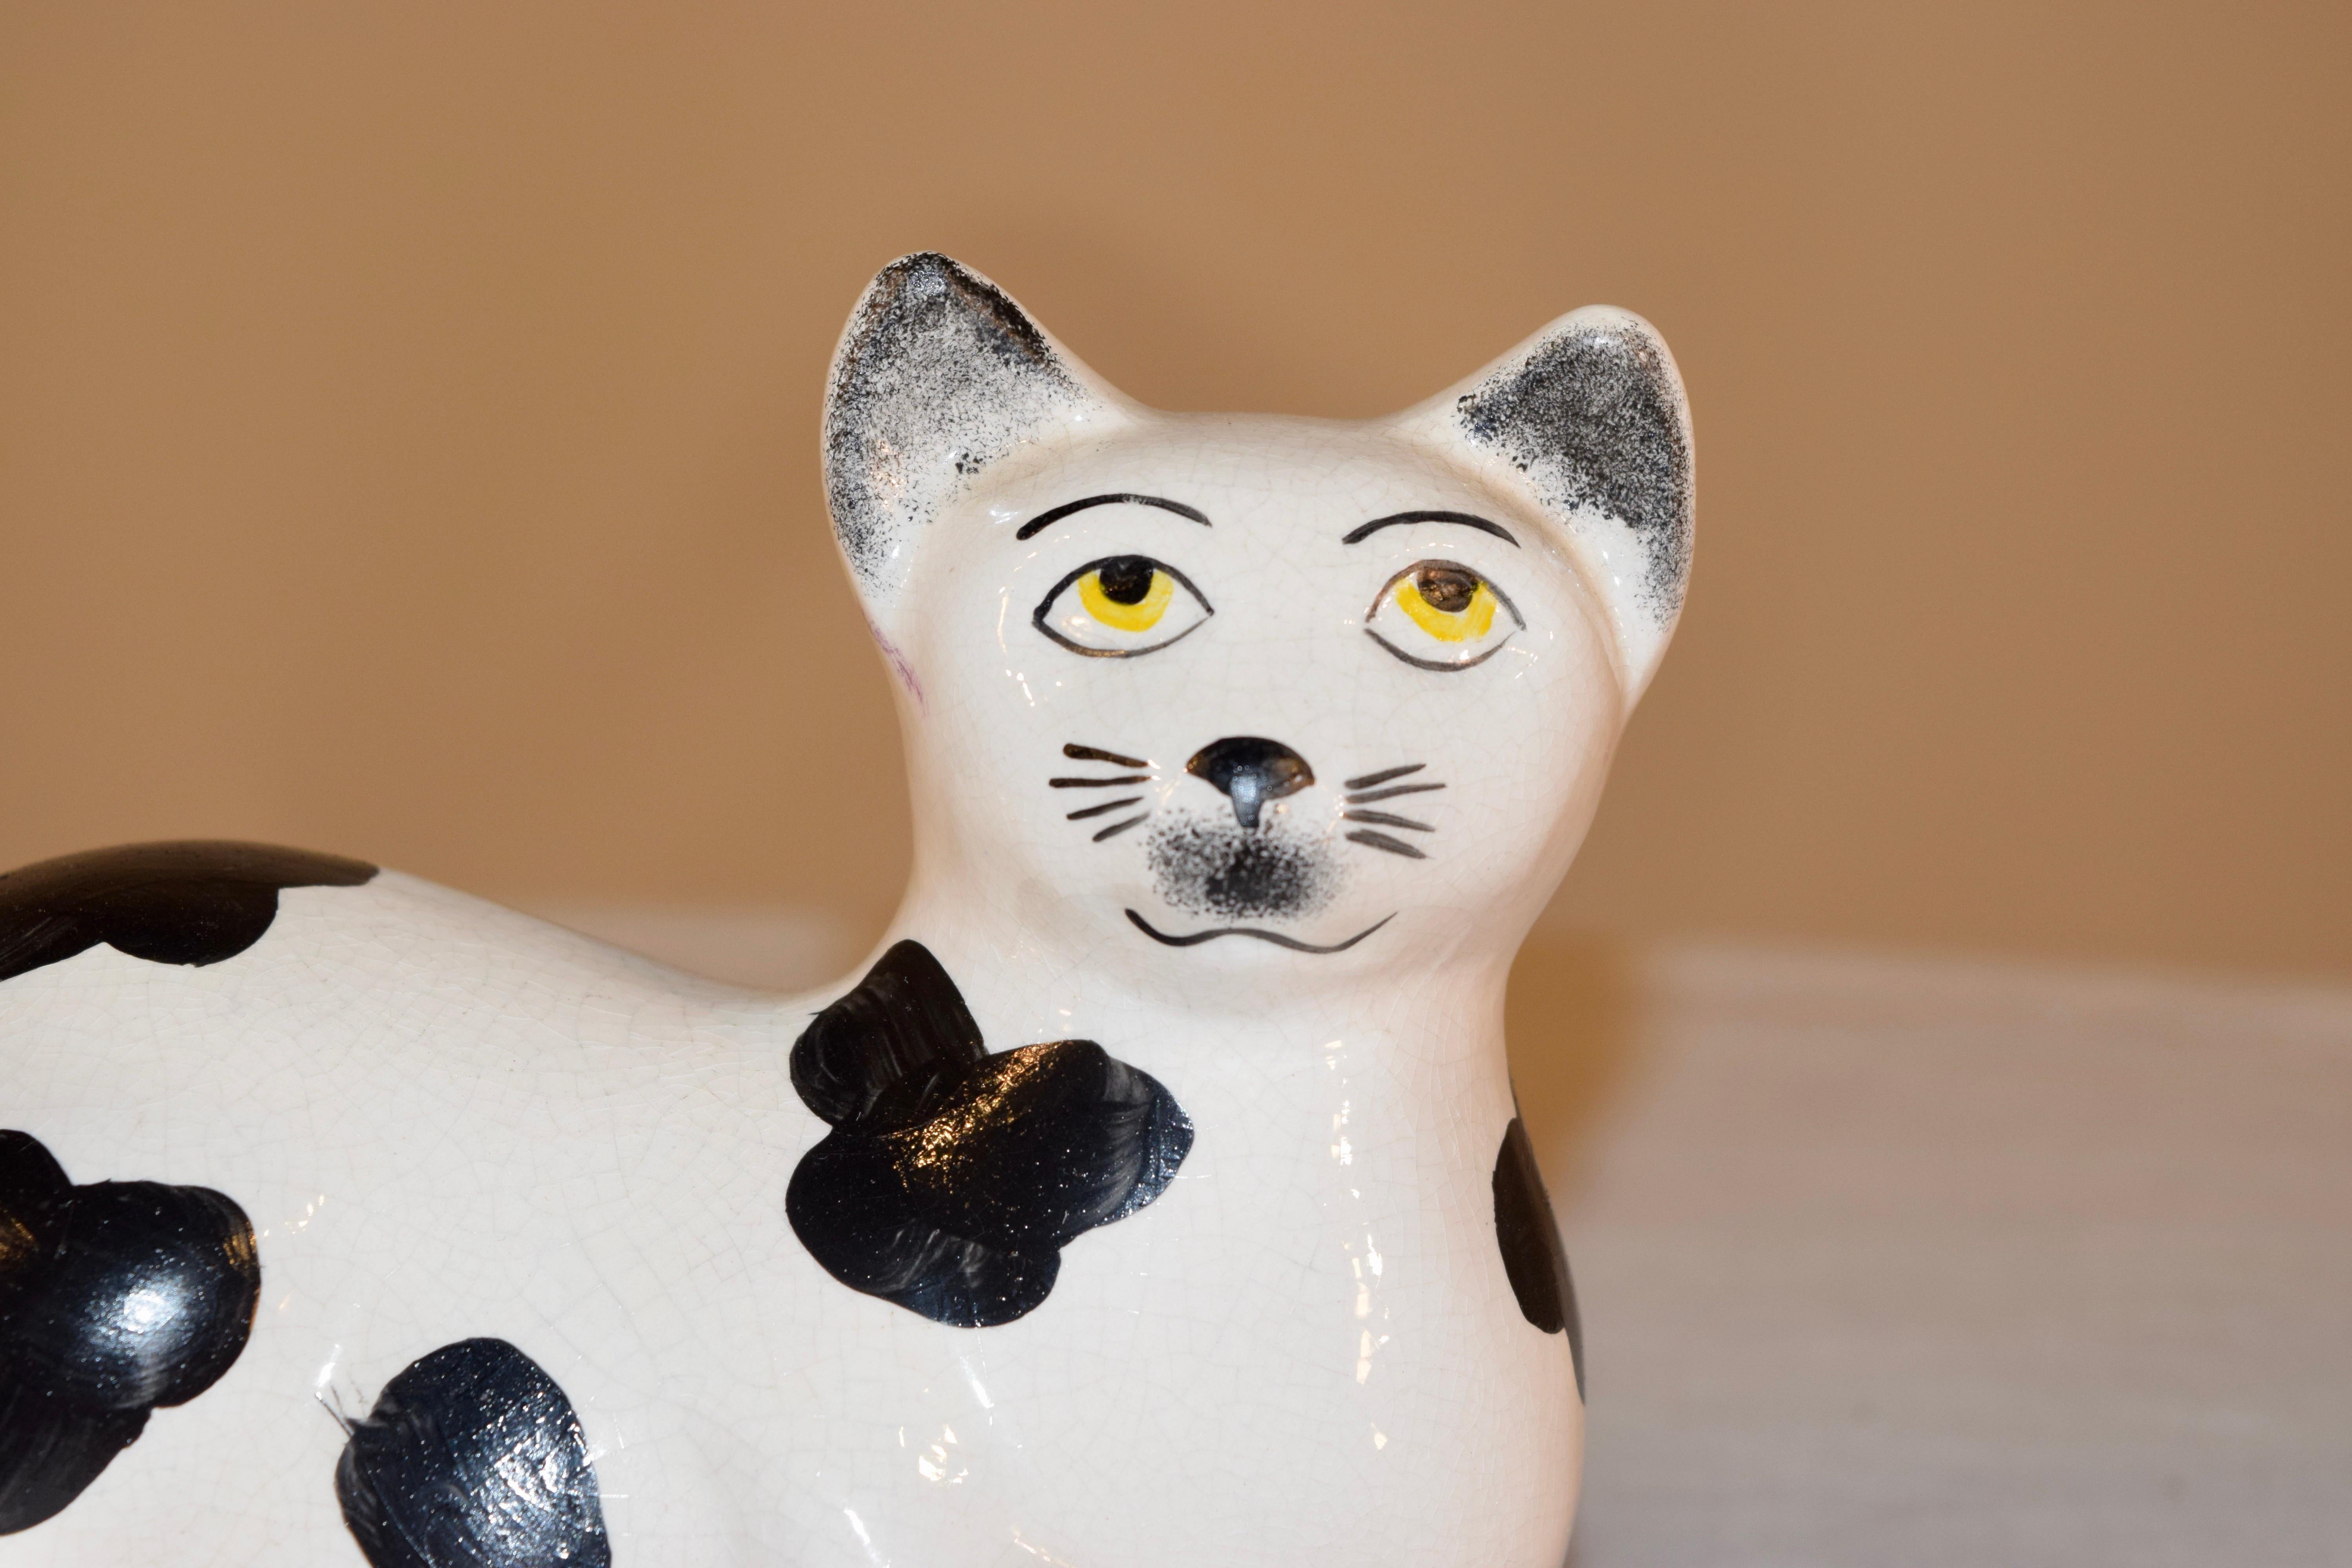 Staffordshire cat figure made in England, circa 1970. The cat is in a lying position and is resting on a blue base.